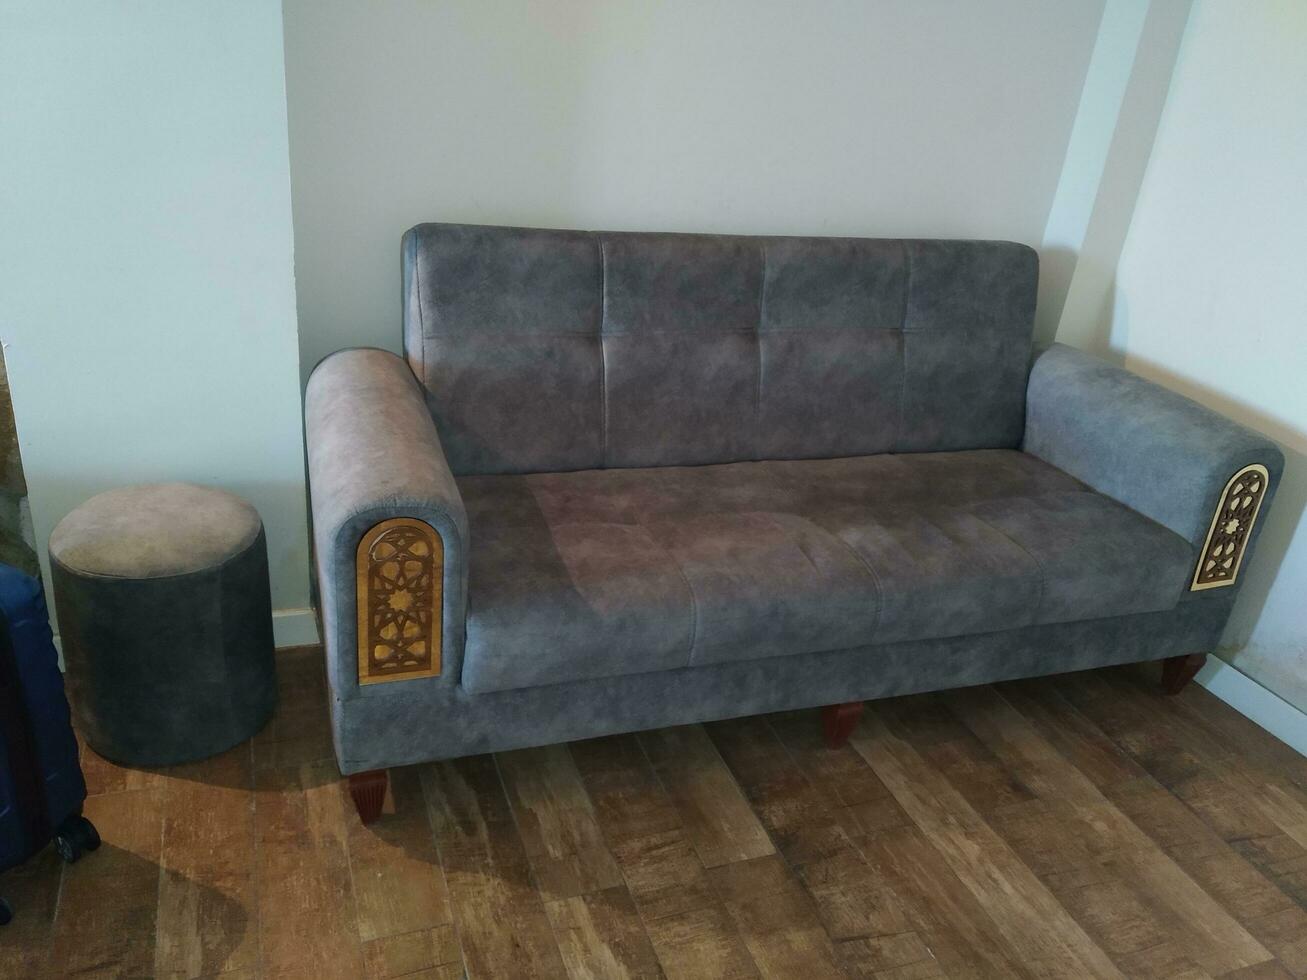 Sofa in the living room of a modern house, closeup of photo